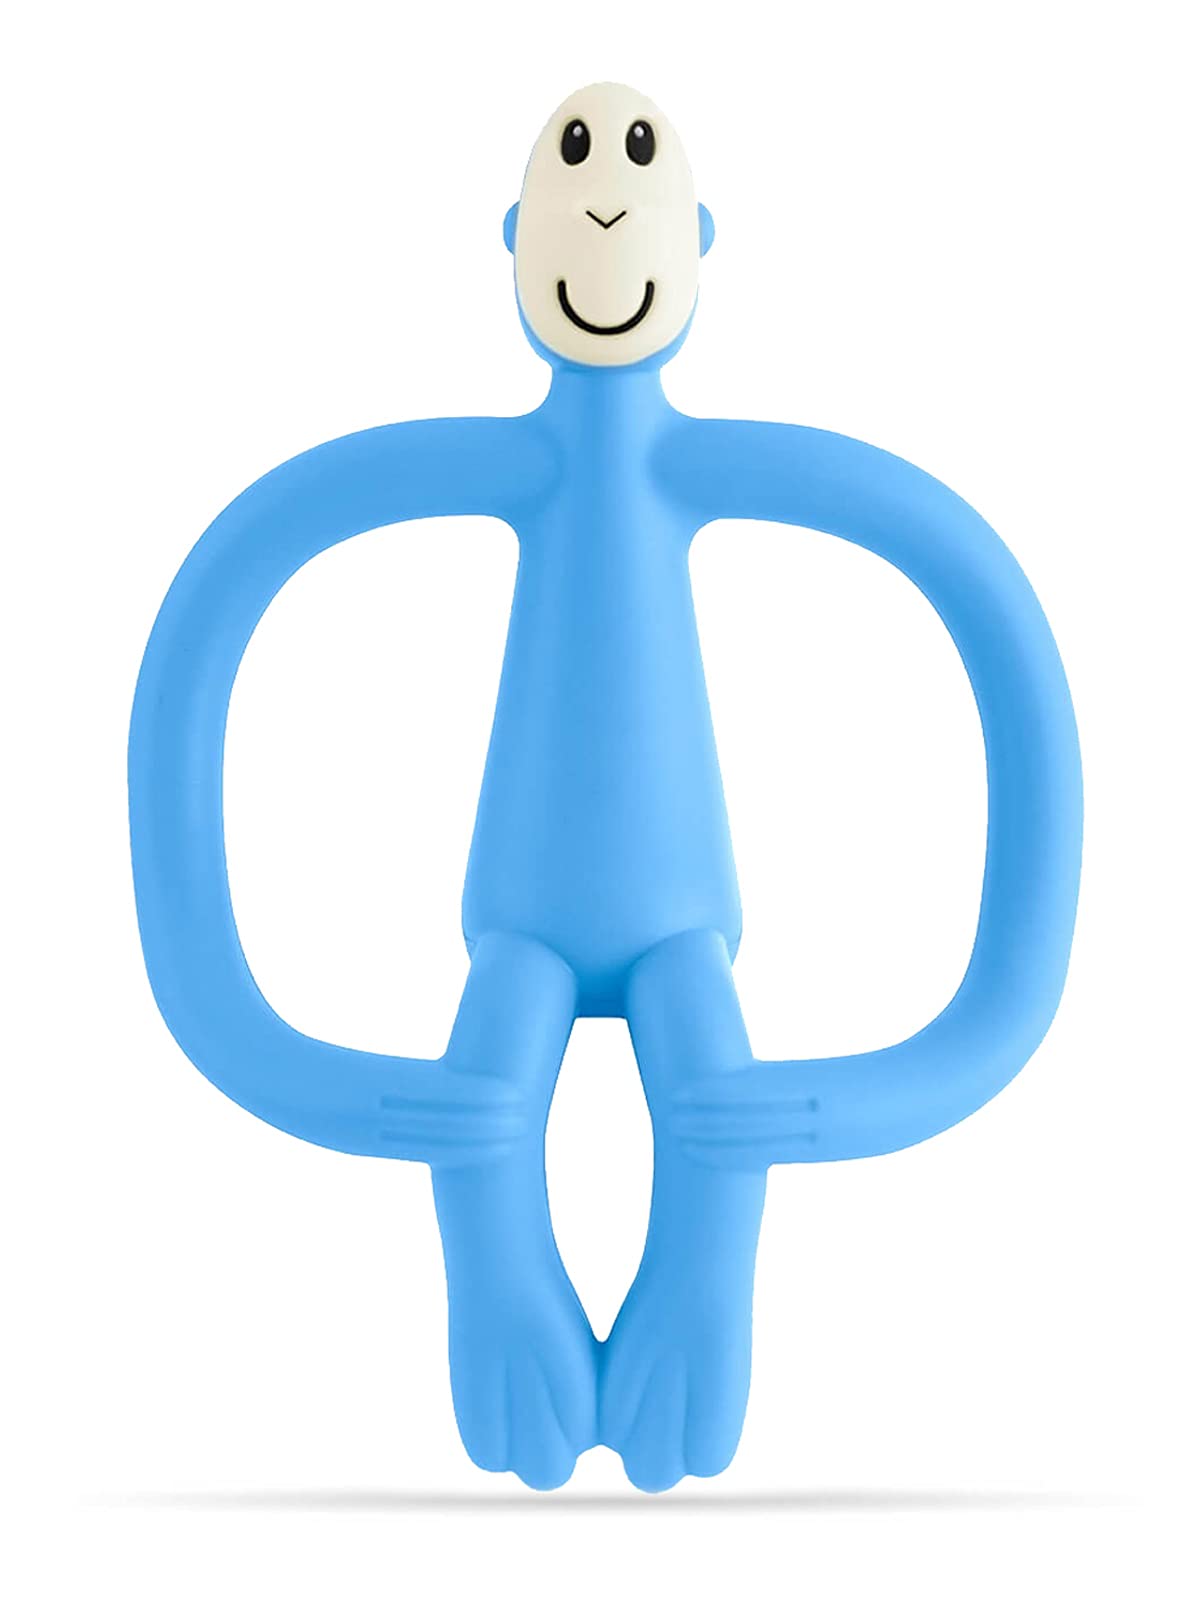 Matchstick Monkey, Original Teether & gel Applicator, Silicone, Easy to grip, BPA Free, 3 Months Old+, 105 cm, Light Blue Monkey